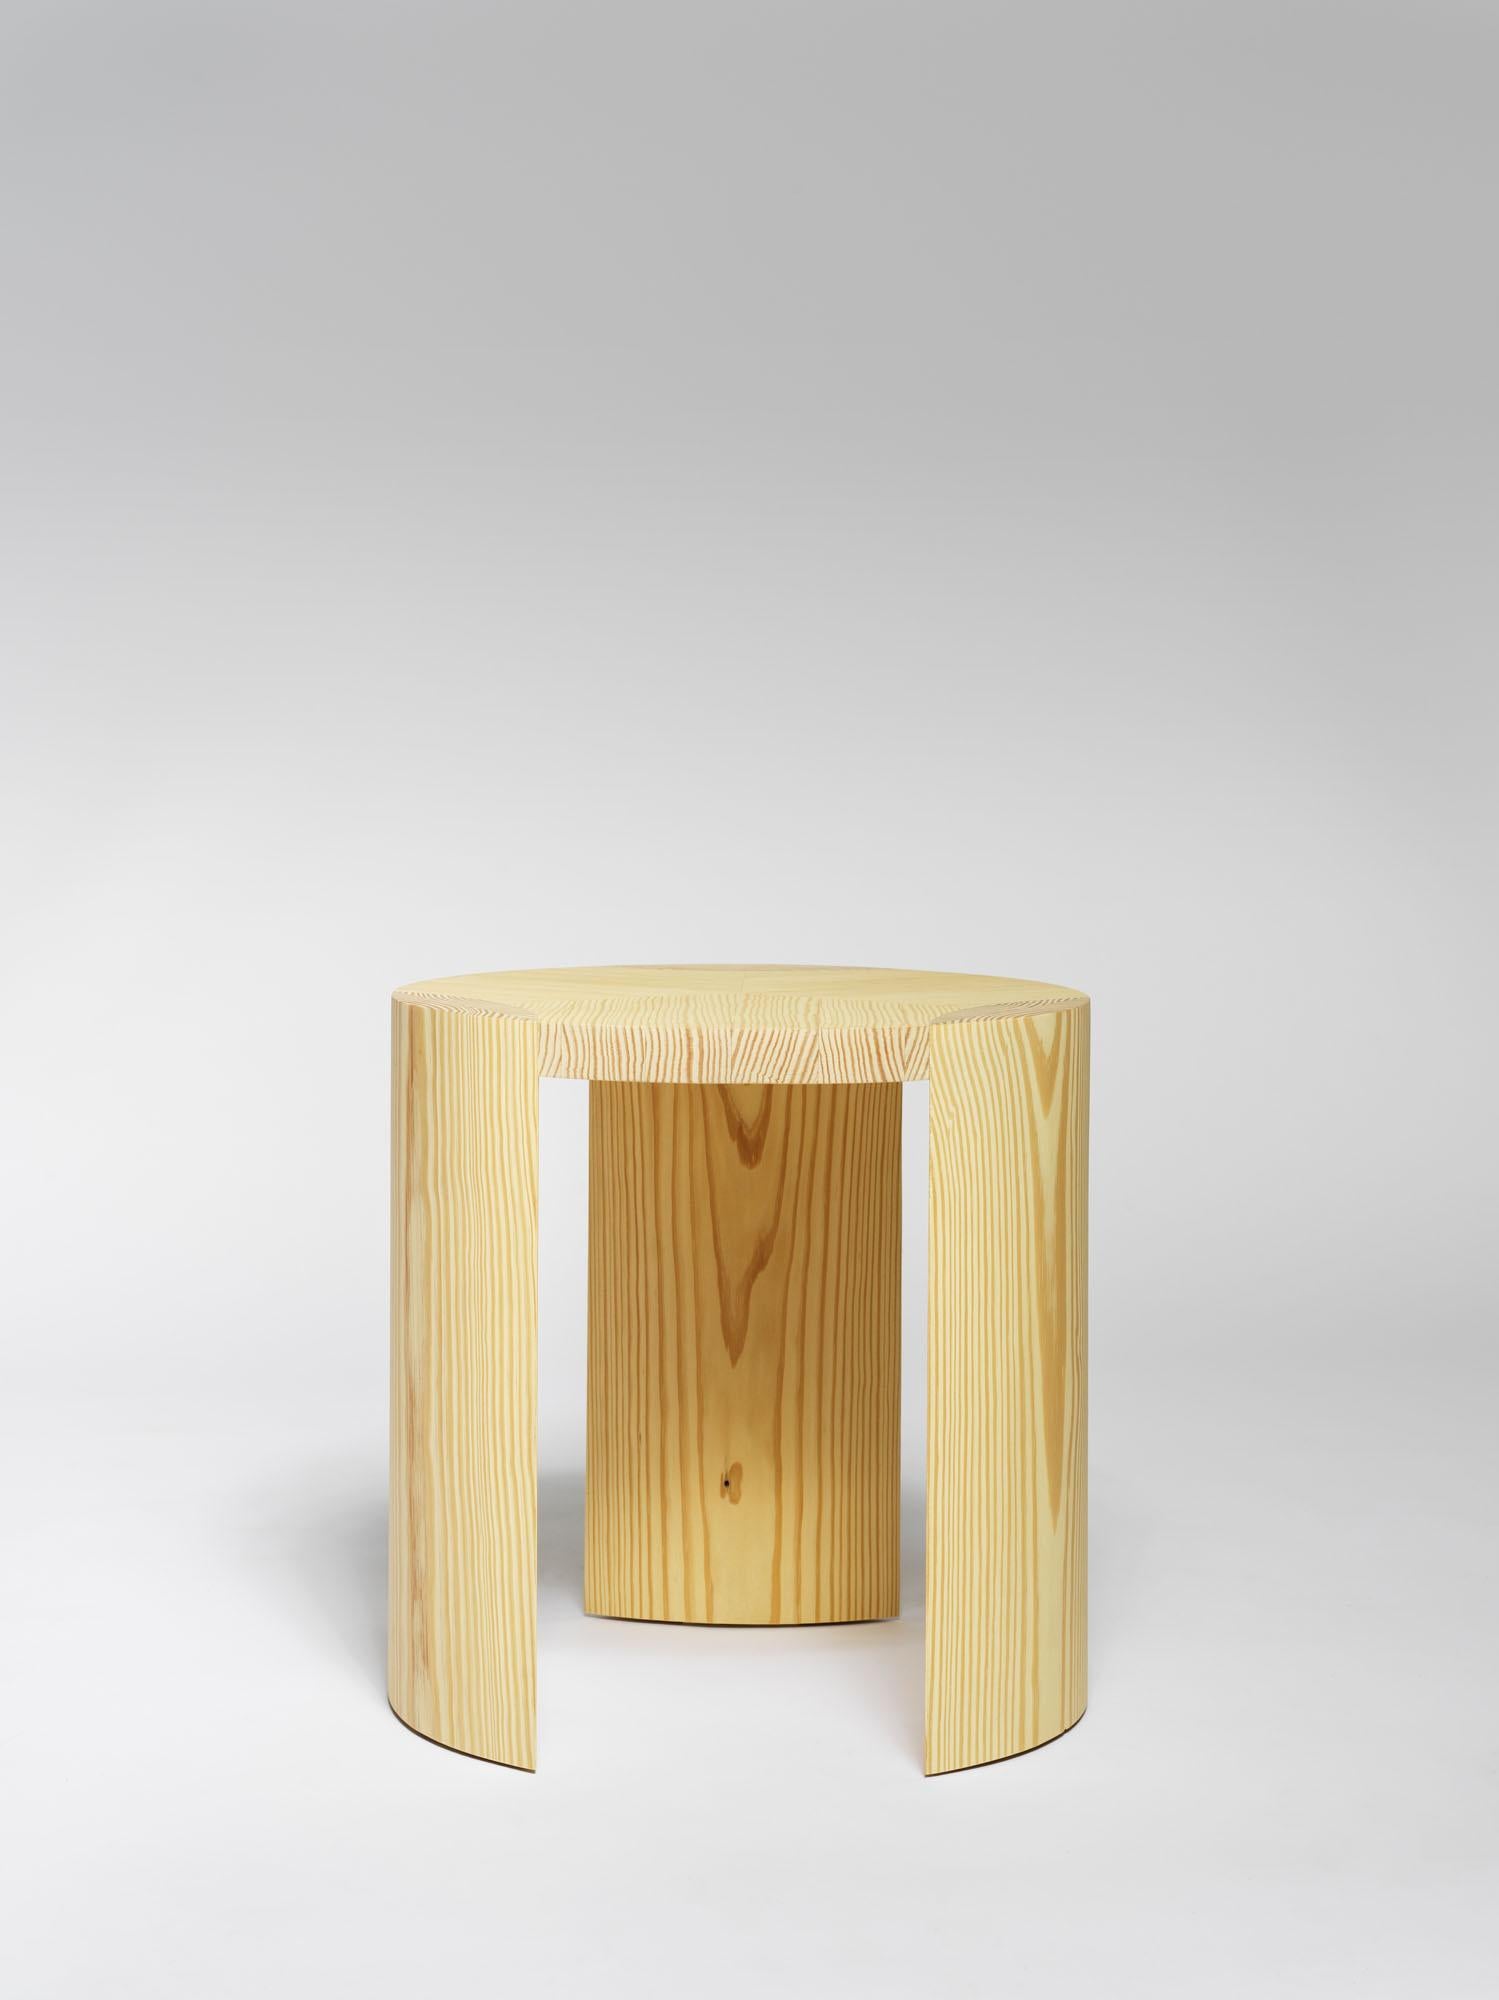 Nort coffee table by Tim Vranken
Materials: Yellow pine
Dimensions: D 60 x H 25 cm

Tim Vranken is a Belgian furniture designer who focuses on solid, handmade furniture. Throughout his designs the use of pure materials and honest natural